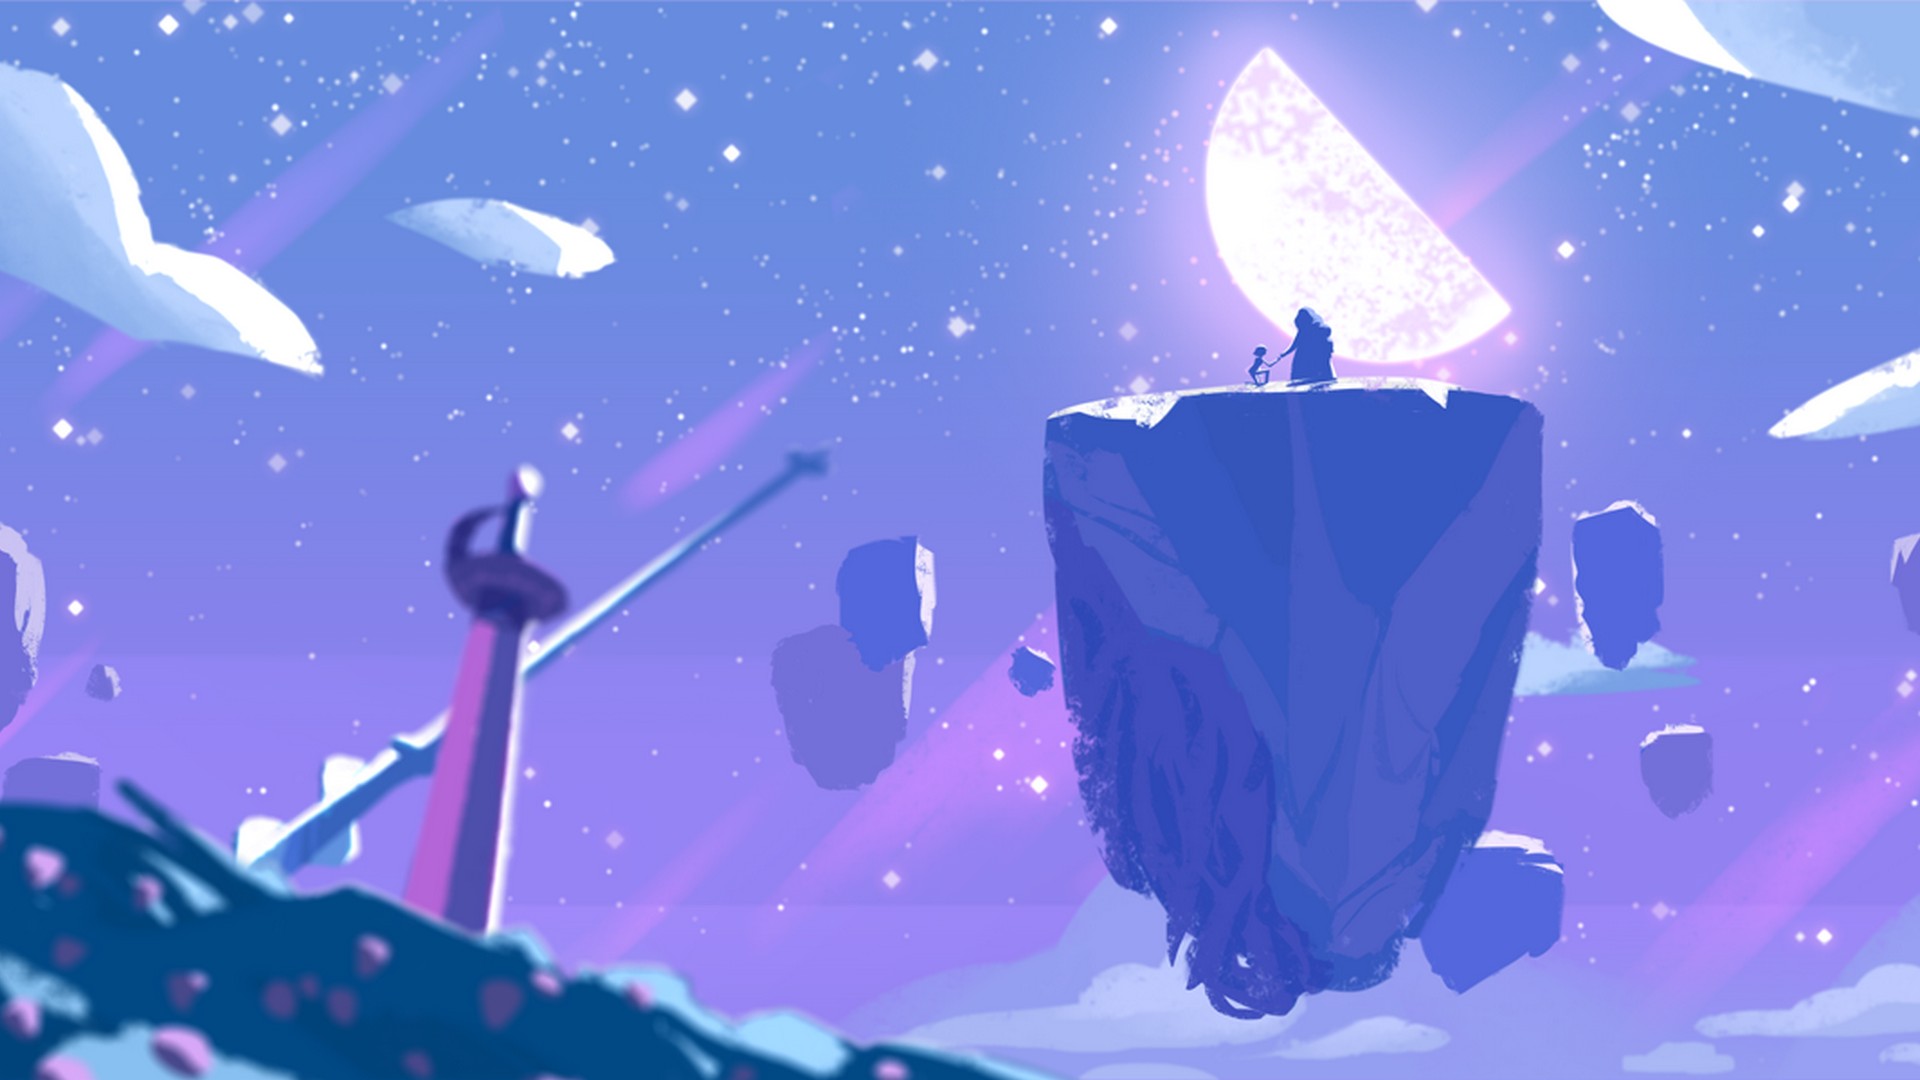 Steven Universe The Movie Wallpaper For Desktop with high-resolution 1920x1080 pixel. You can use this wallpaper for your Windows and Mac OS computers as well as your Android and iPhone smartphones